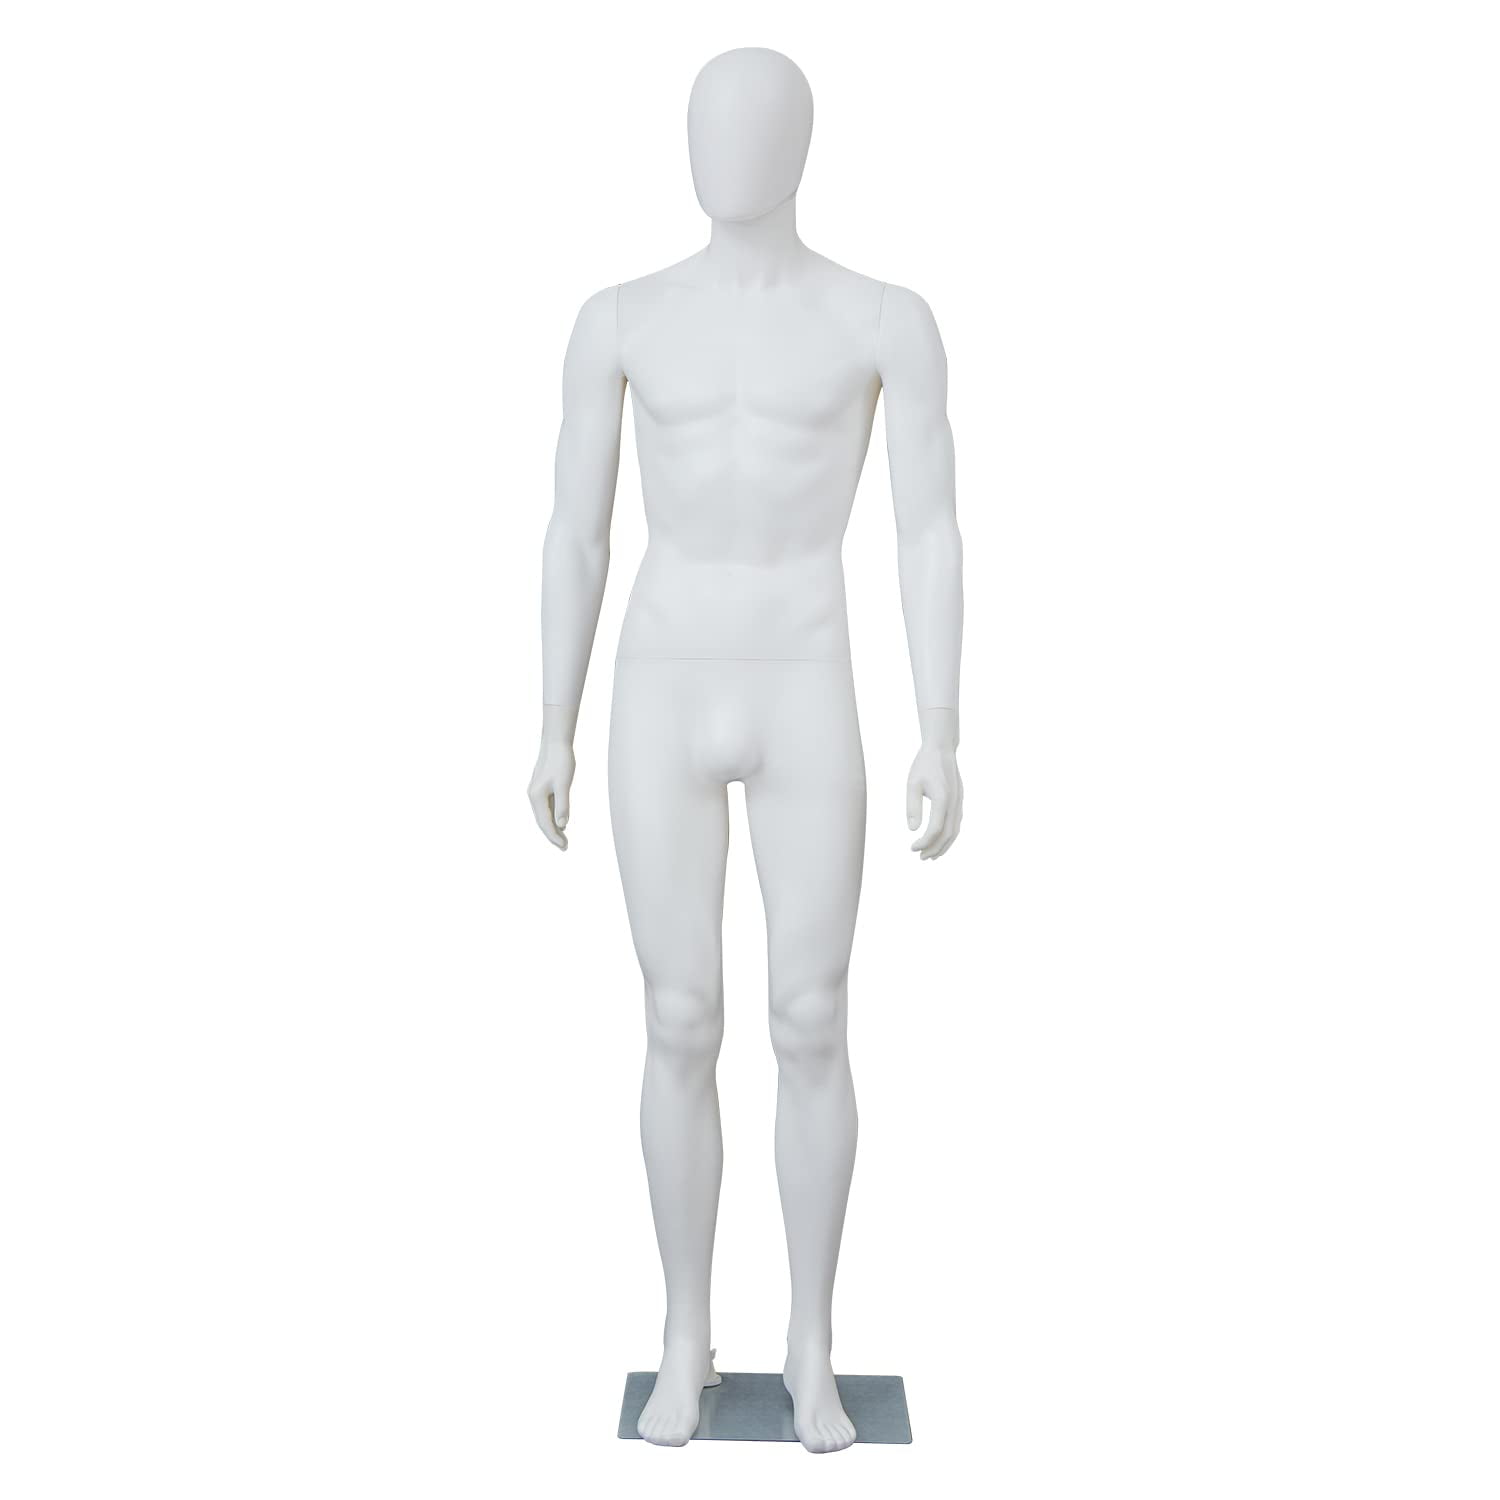 1 STAND 2 REMOVAL HANGERS 2 FREE-STANDING MANNEQUIN MALE & FEMALE TORSOS SET 